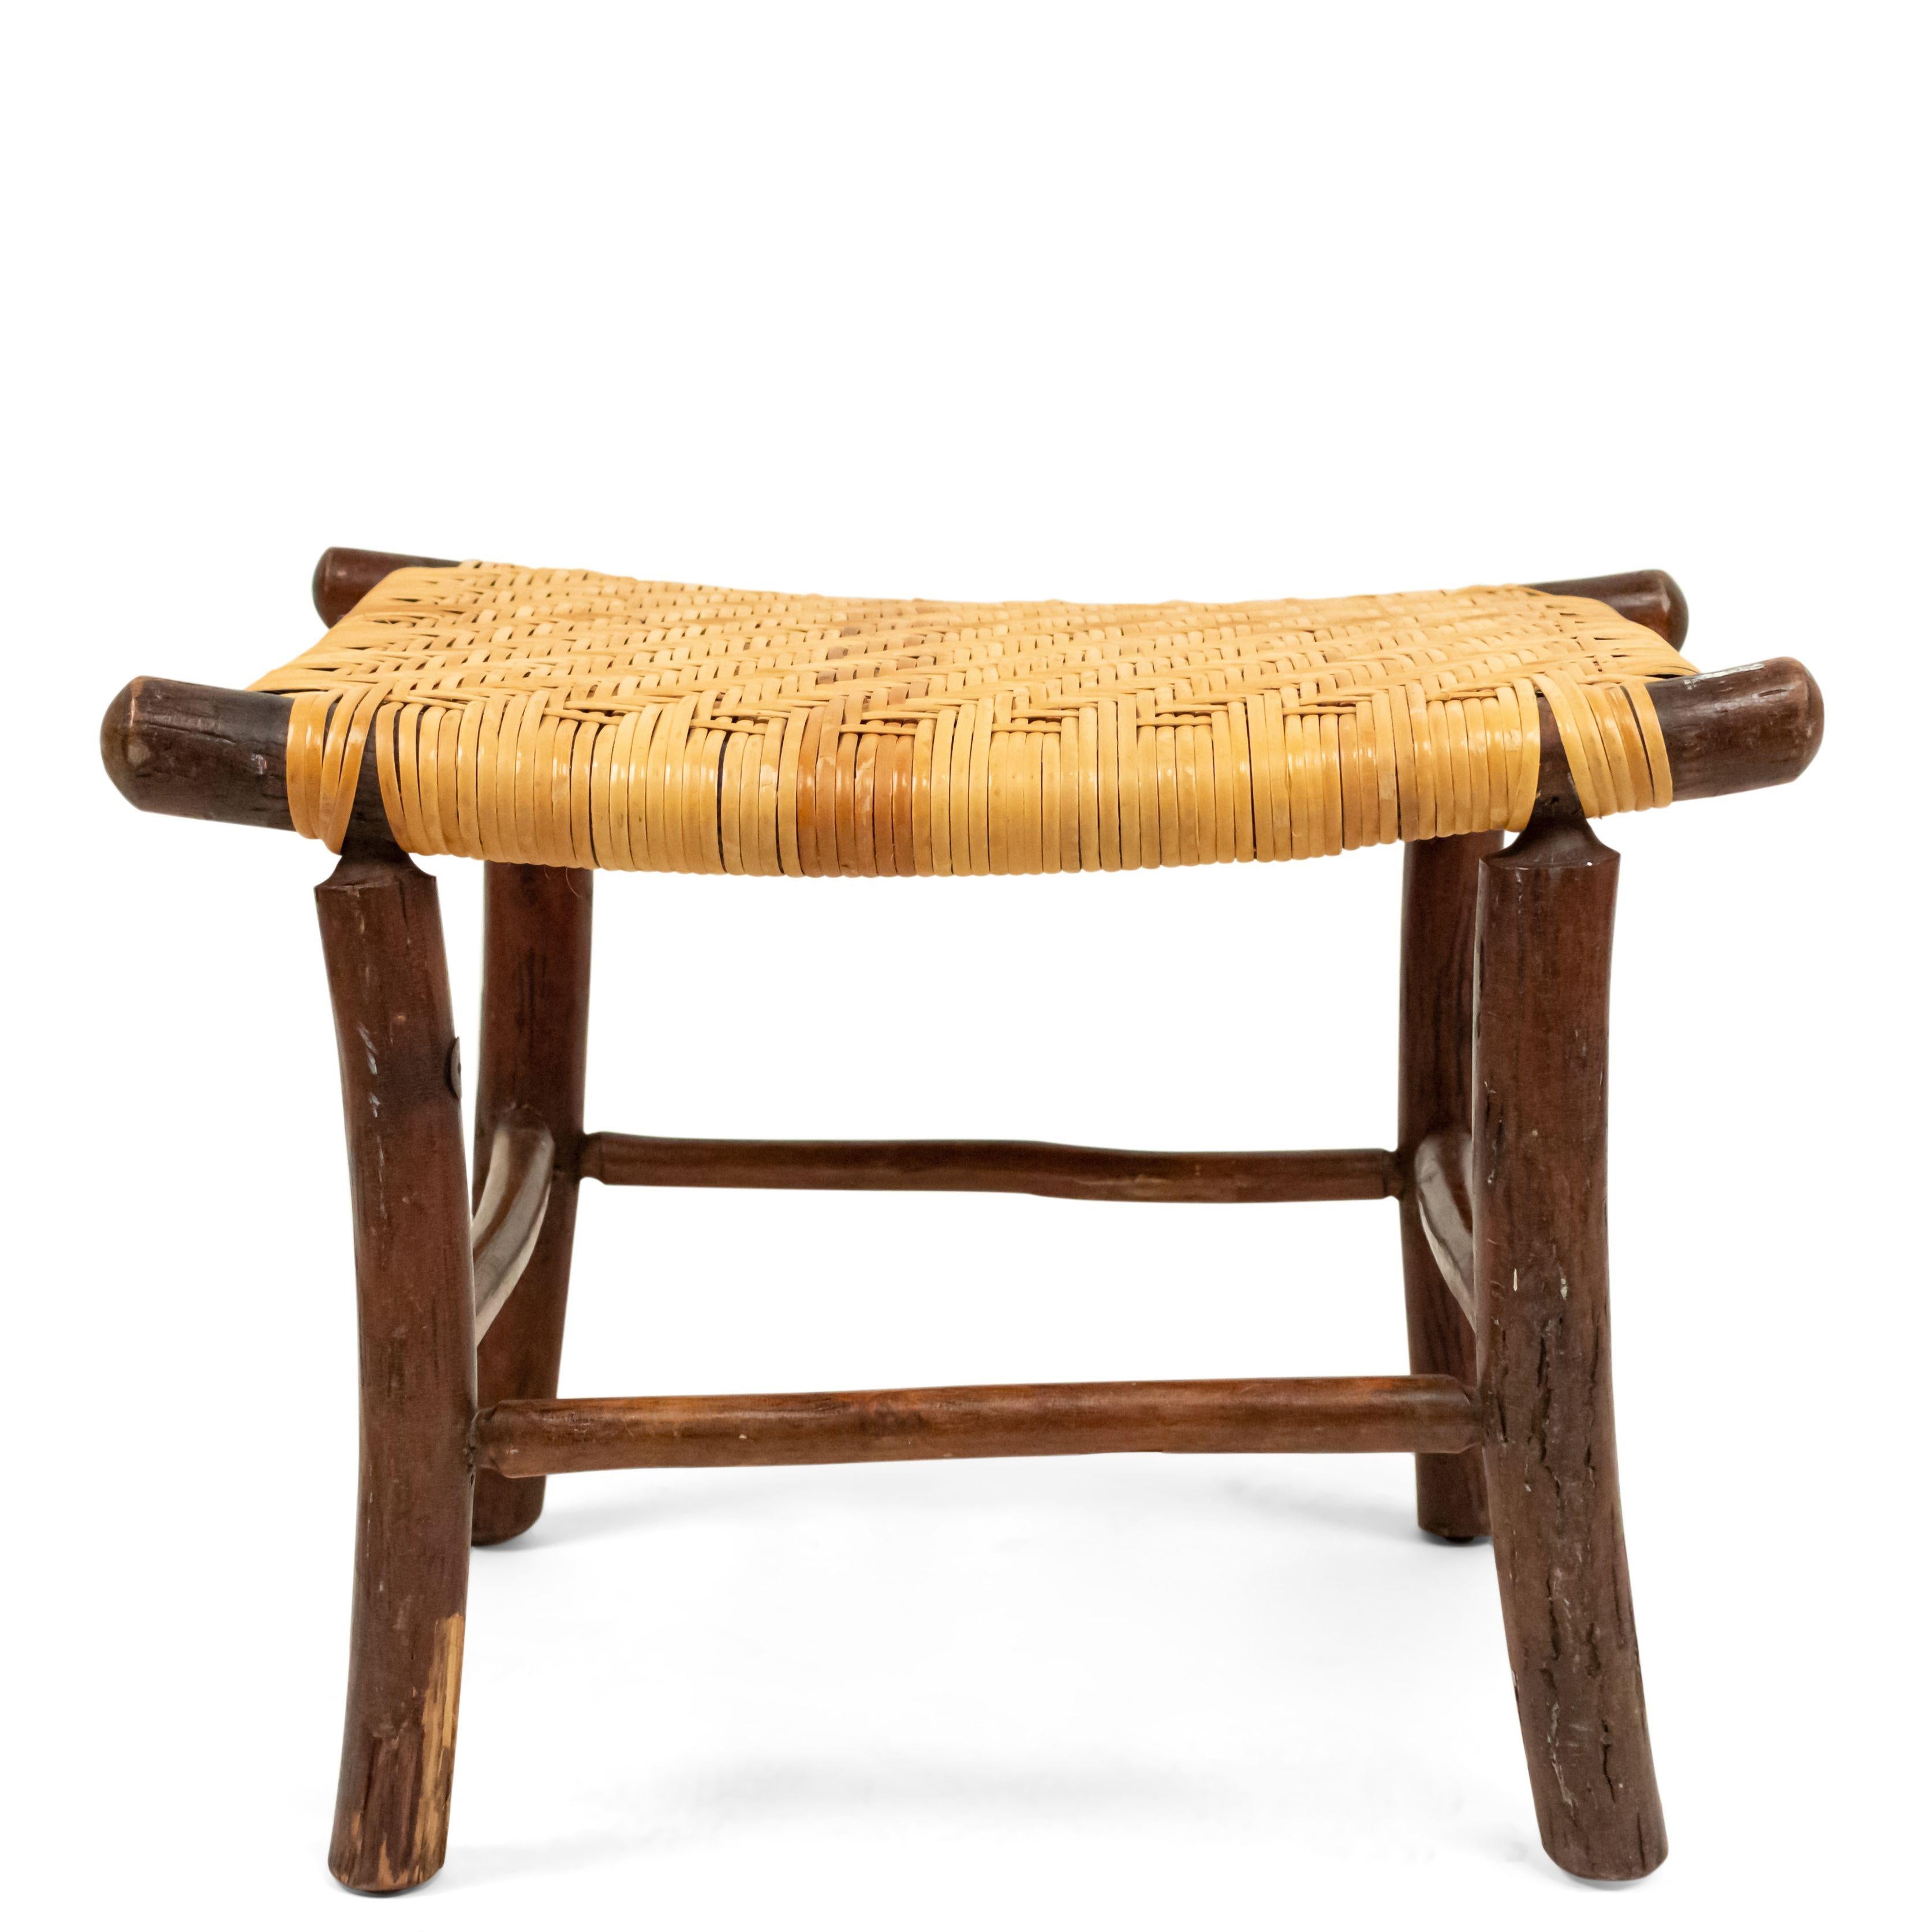 American Rustic Old Hickory foot stool with (new) woven saddle shaped seat (signed with round metal tag)
